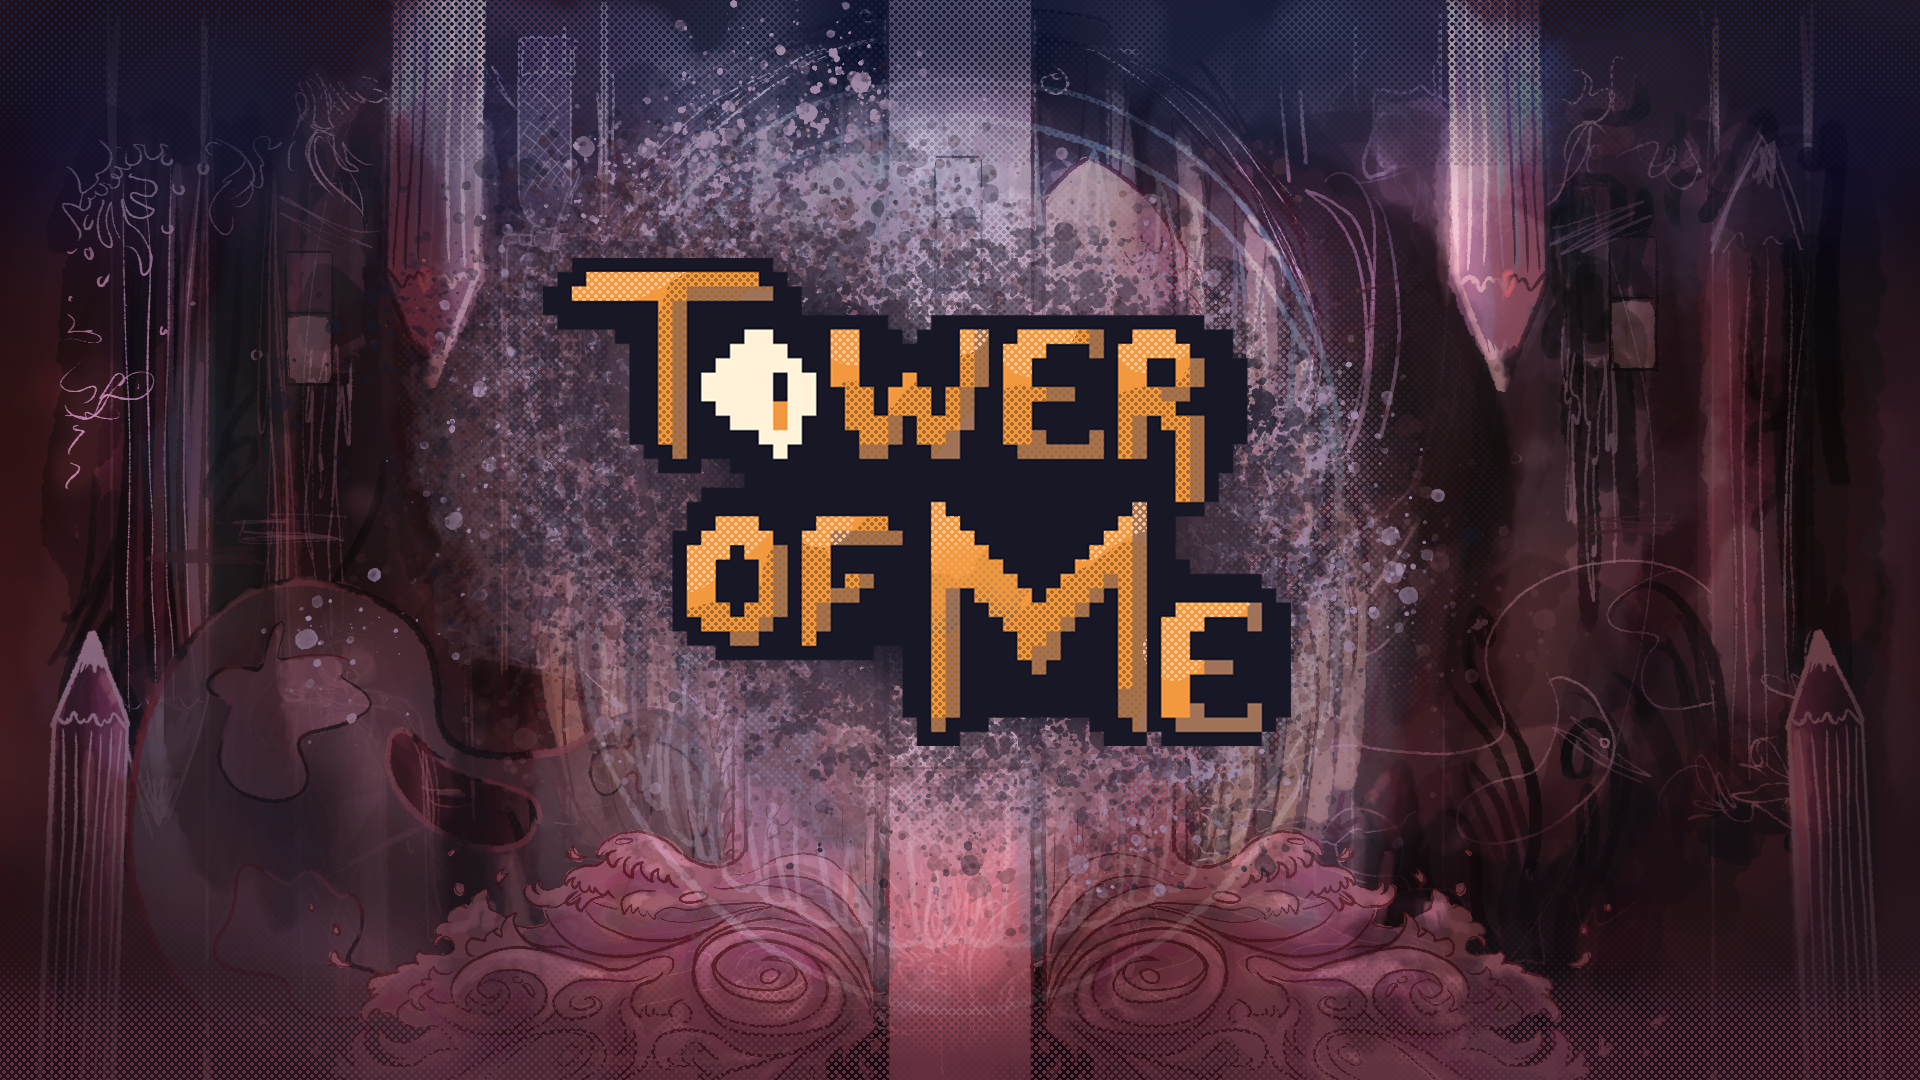 Tower of Me